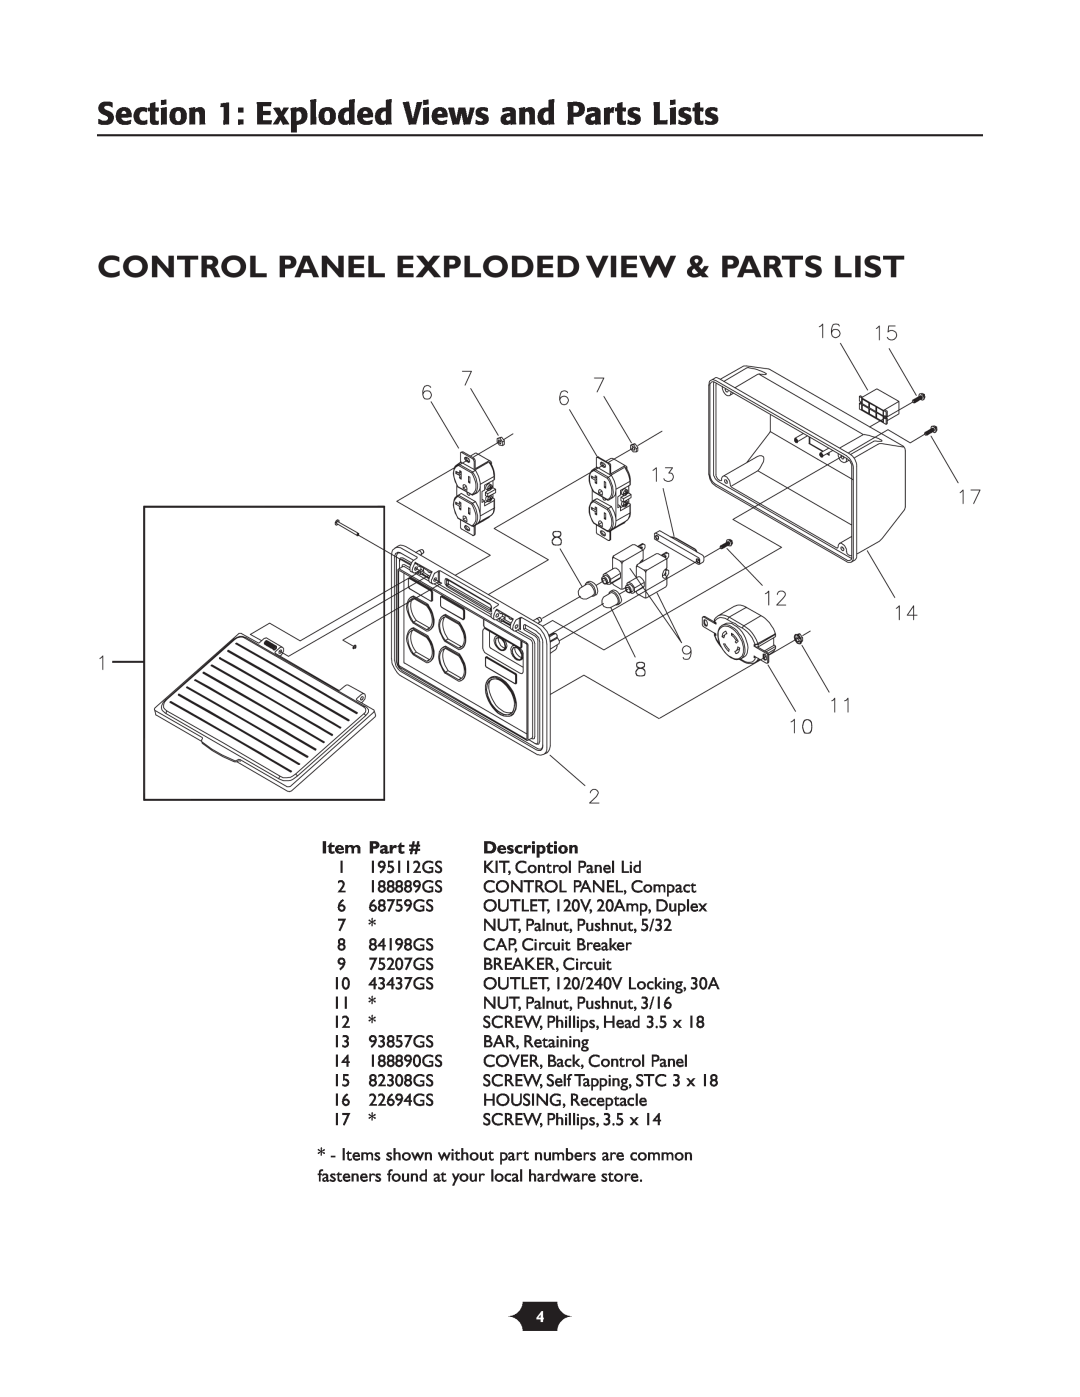 Briggs & Stratton 1919 manual Control Panel Exploded View & Parts List, Exploded Views and Parts Lists, Description 